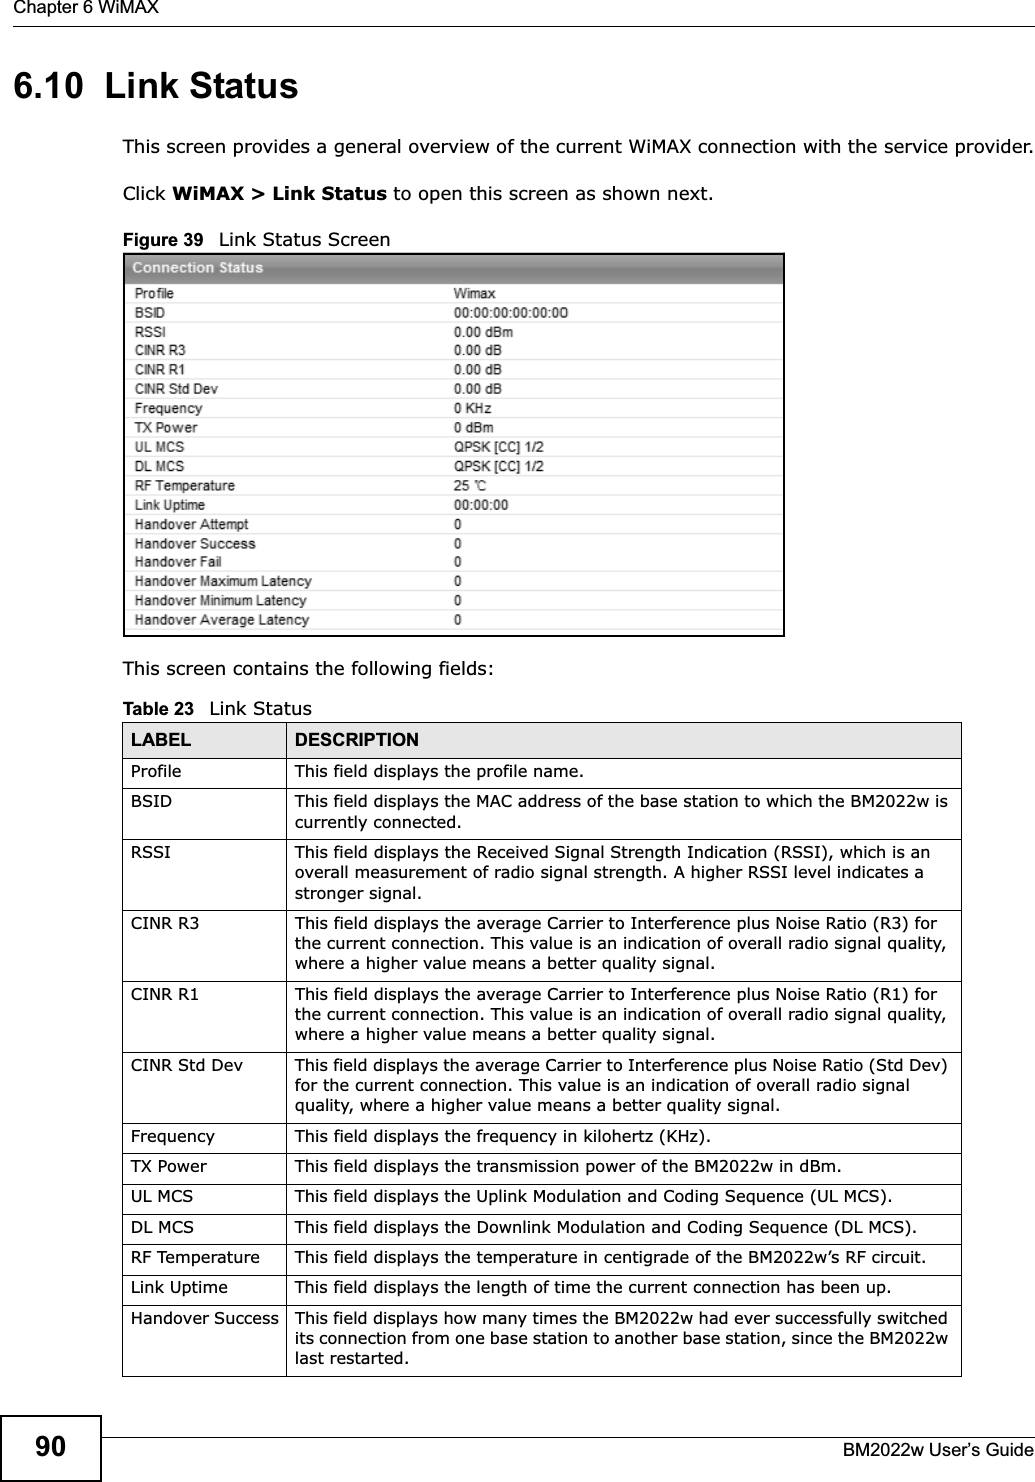 Chapter 6 WiMAXBM2022w User’s Guide906.10  Link StatusThis screen provides a general overview of the current WiMAX connection with the service provider.Click WiMAX &gt; Link Status to open this screen as shown next.Figure 39   Link Status ScreenThis screen contains the following fields:Table 23   Link StatusLABEL DESCRIPTIONProfile This field displays the profile name.BSID This field displays the MAC address of the base station to which the BM2022w is currently connected.RSSI This field displays the Received Signal Strength Indication (RSSI), which is an overall measurement of radio signal strength. A higher RSSI level indicates a stronger signal.CINR R3 This field displays the average Carrier to Interference plus Noise Ratio (R3) for the current connection. This value is an indication of overall radio signal quality, where a higher value means a better quality signal.CINR R1 This field displays the average Carrier to Interference plus Noise Ratio (R1) for the current connection. This value is an indication of overall radio signal quality, where a higher value means a better quality signal.CINR Std Dev This field displays the average Carrier to Interference plus Noise Ratio (Std Dev) for the current connection. This value is an indication of overall radio signal quality, where a higher value means a better quality signal.Frequency This field displays the frequency in kilohertz (KHz).TX Power This field displays the transmission power of the BM2022w in dBm.UL MCS This field displays the Uplink Modulation and Coding Sequence (UL MCS).DL MCS This field displays the Downlink Modulation and Coding Sequence (DL MCS).RF Temperature This field displays the temperature in centigrade of the BM2022w’s RF circuit.Link Uptime This field displays the length of time the current connection has been up.Handover Success This field displays how many times the BM2022w had ever successfully switched its connection from one base station to another base station, since the BM2022w last restarted.